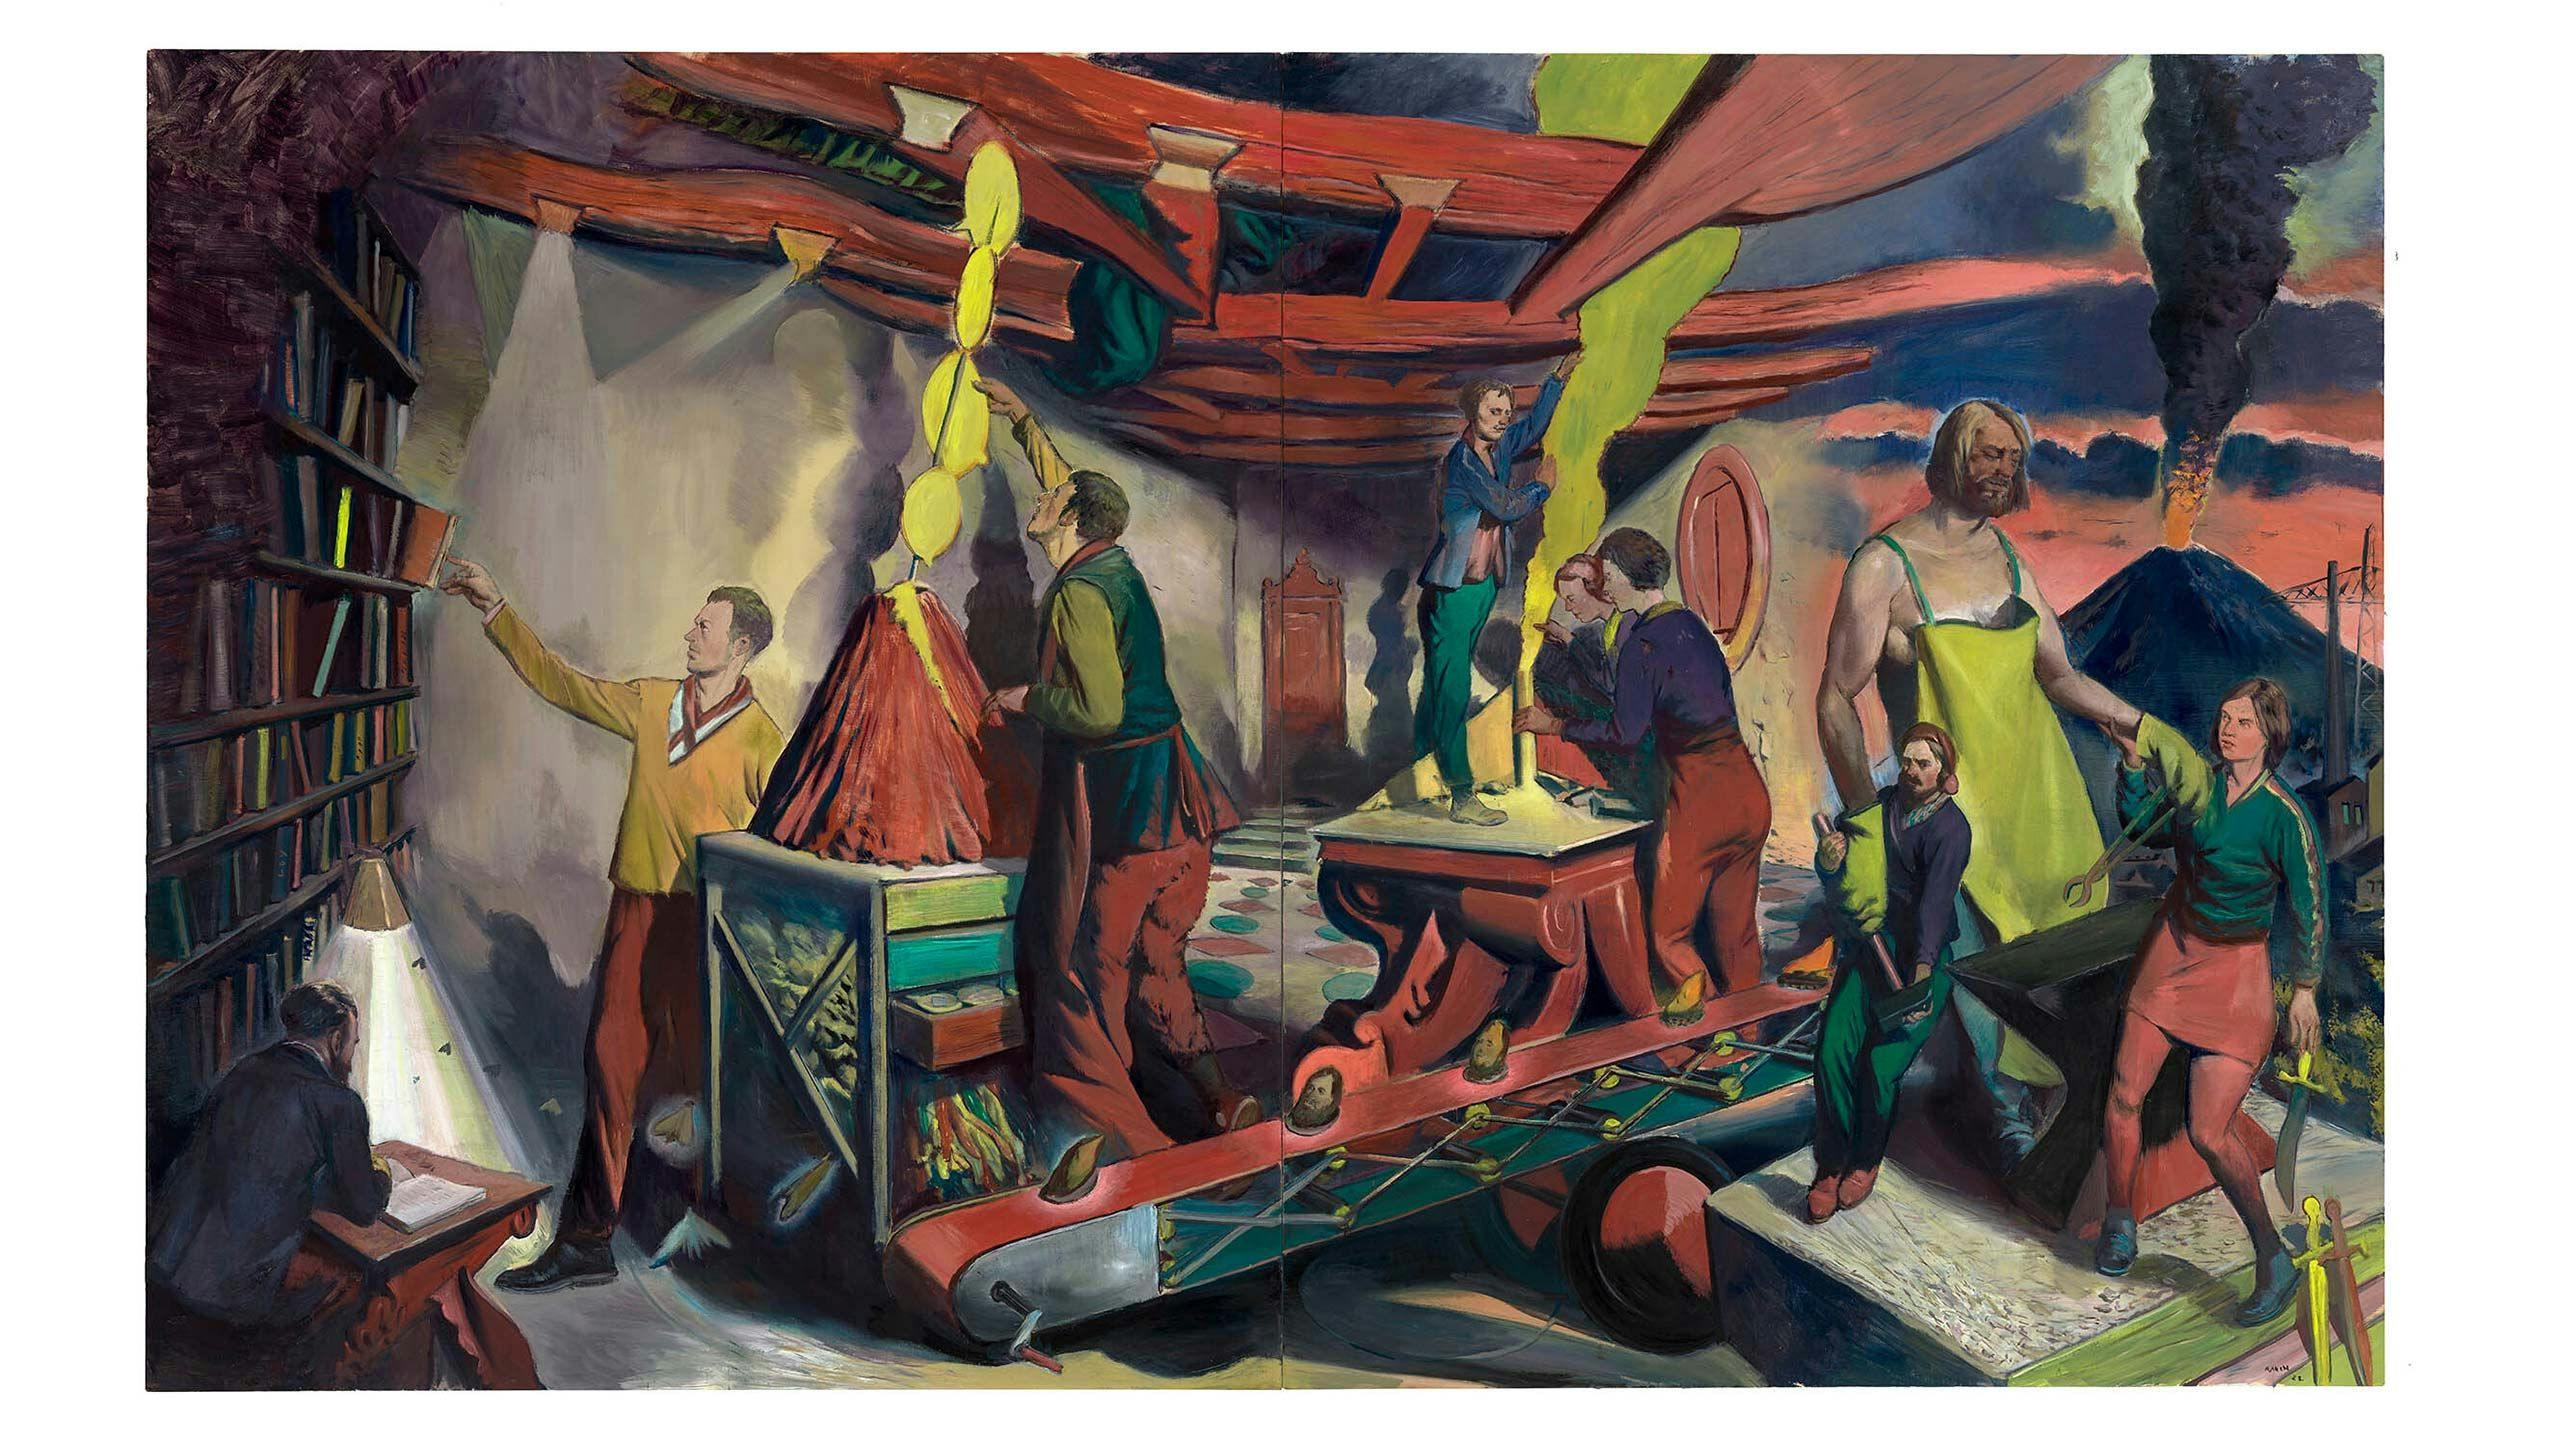 A painting by Neo Rauch, titled Vulkanschule, dated 2022